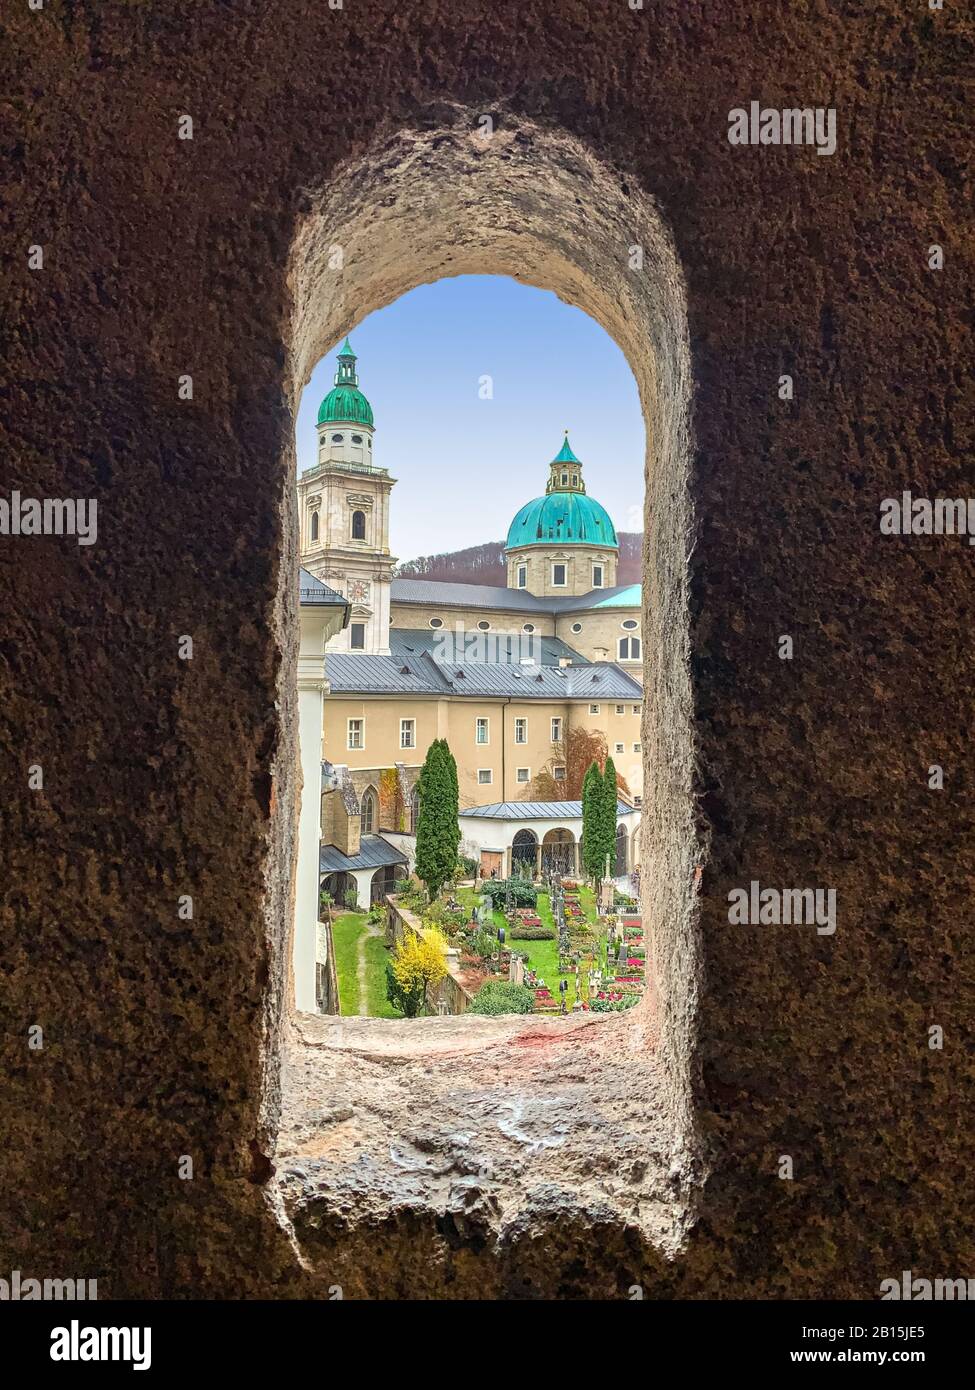 Salzburg Cathedral and St Peter Cemetery, the spiritual heart of Salzburg, Austria, Europe. Seen through a window of the Catacombs. Stock Photo